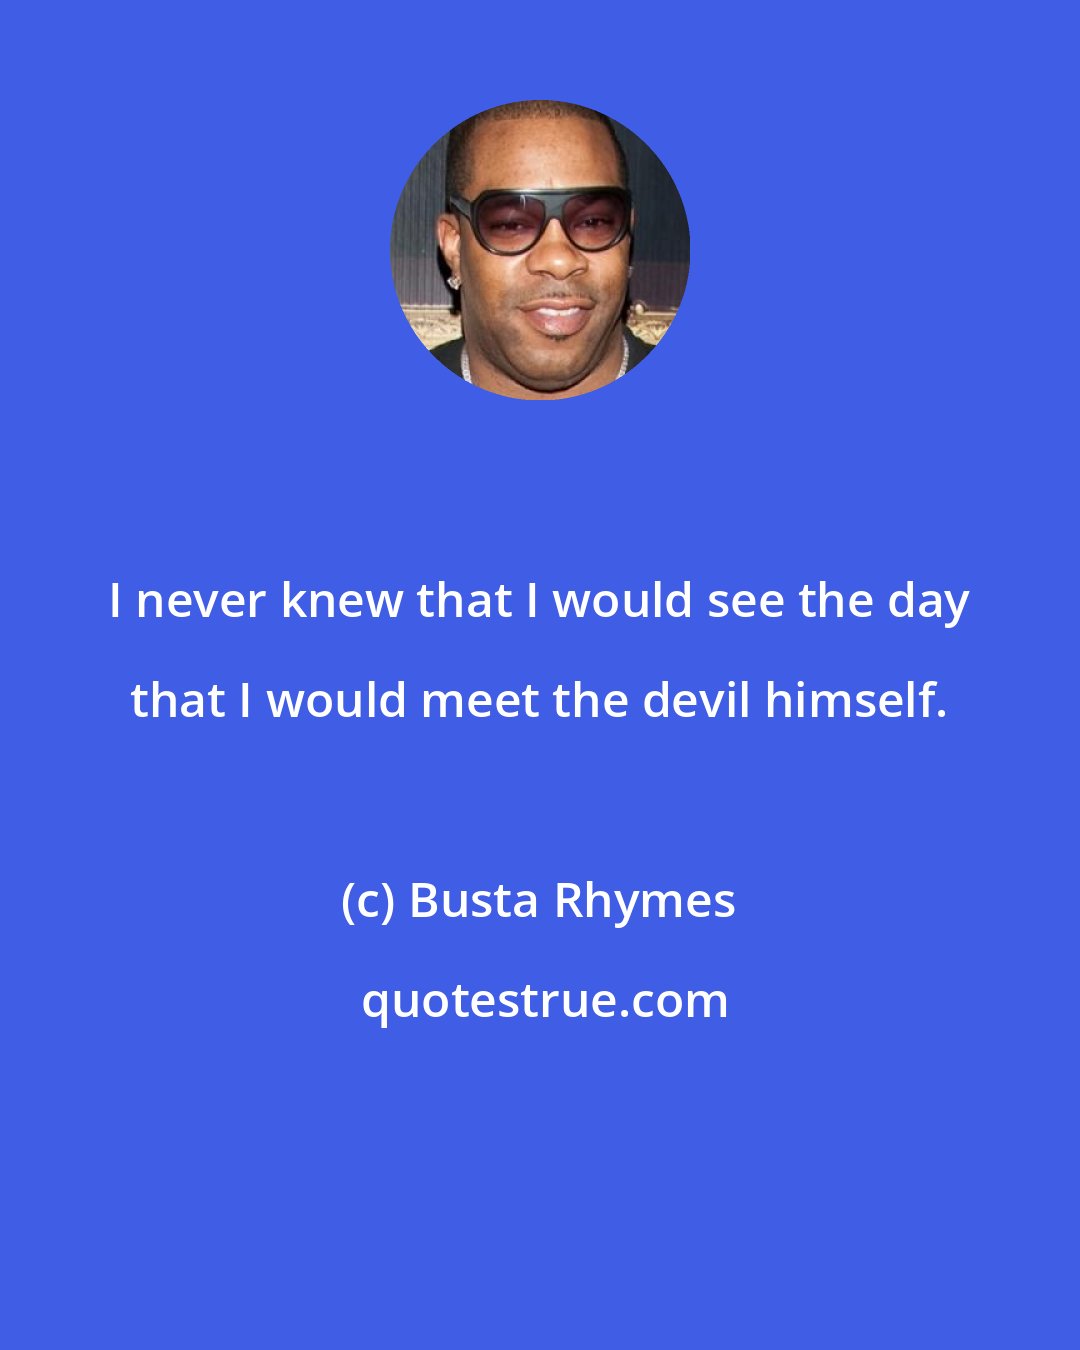 Busta Rhymes: I never knew that I would see the day that I would meet the devil himself.